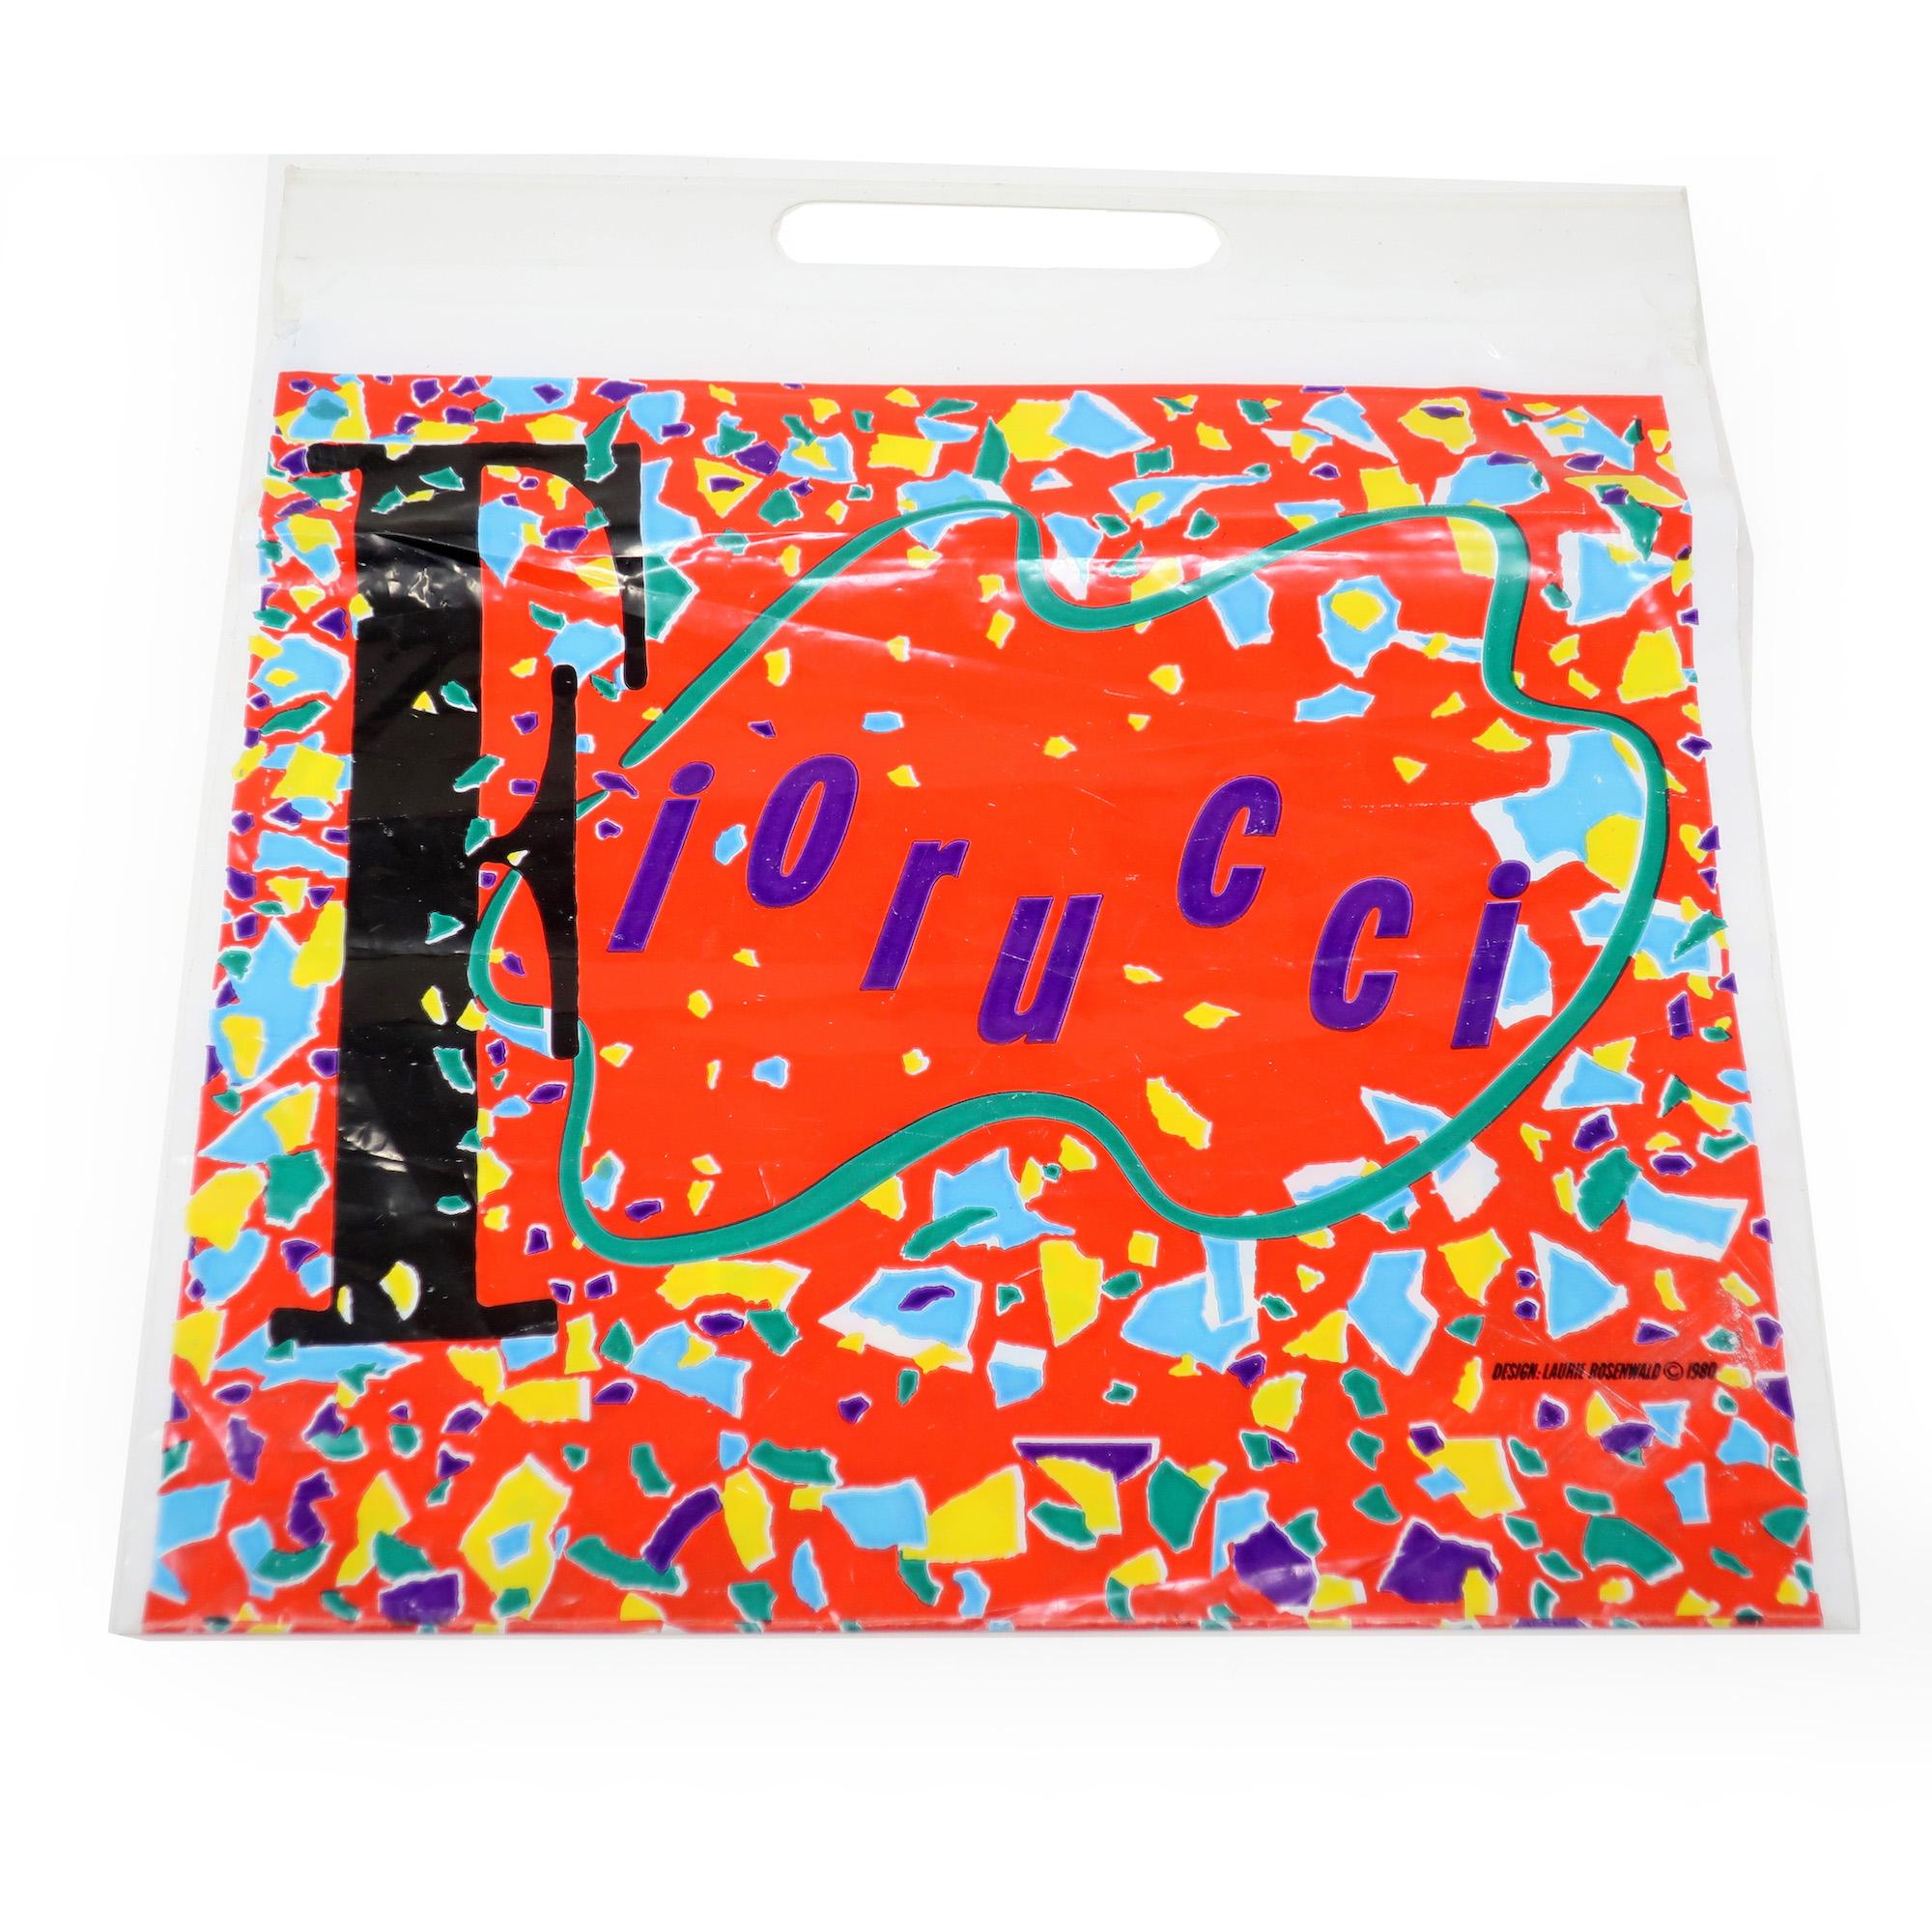 A pair of plastic Fiorucci shopping bags from 1980 designed by Laurie Rosenwald, daughter of sculptor Robert Rosenwald. A perfect time capsule! Rosenwald is a graphic designer, illustrator, and painter known for her bright and playful graphic work.